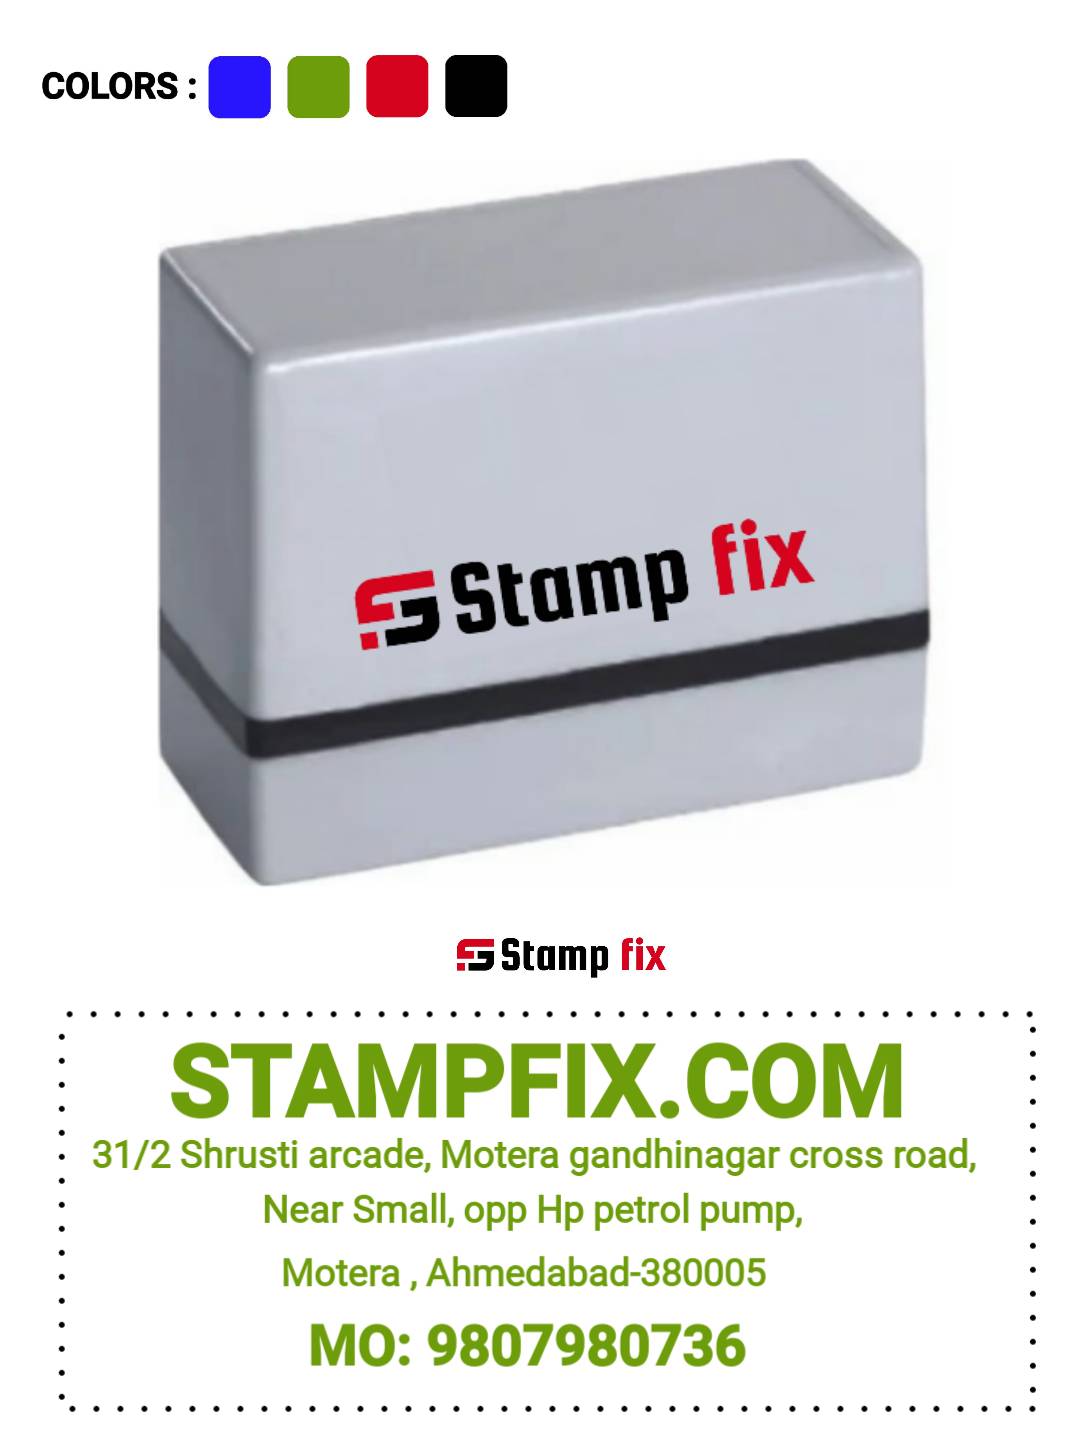 Pre Ink Address Stamp by StampFix, a self-inking stamp with high-quality impressions
in India, nylon stamp, rubber stamp, pre ink stamp, polymer stamp, urgent stamp